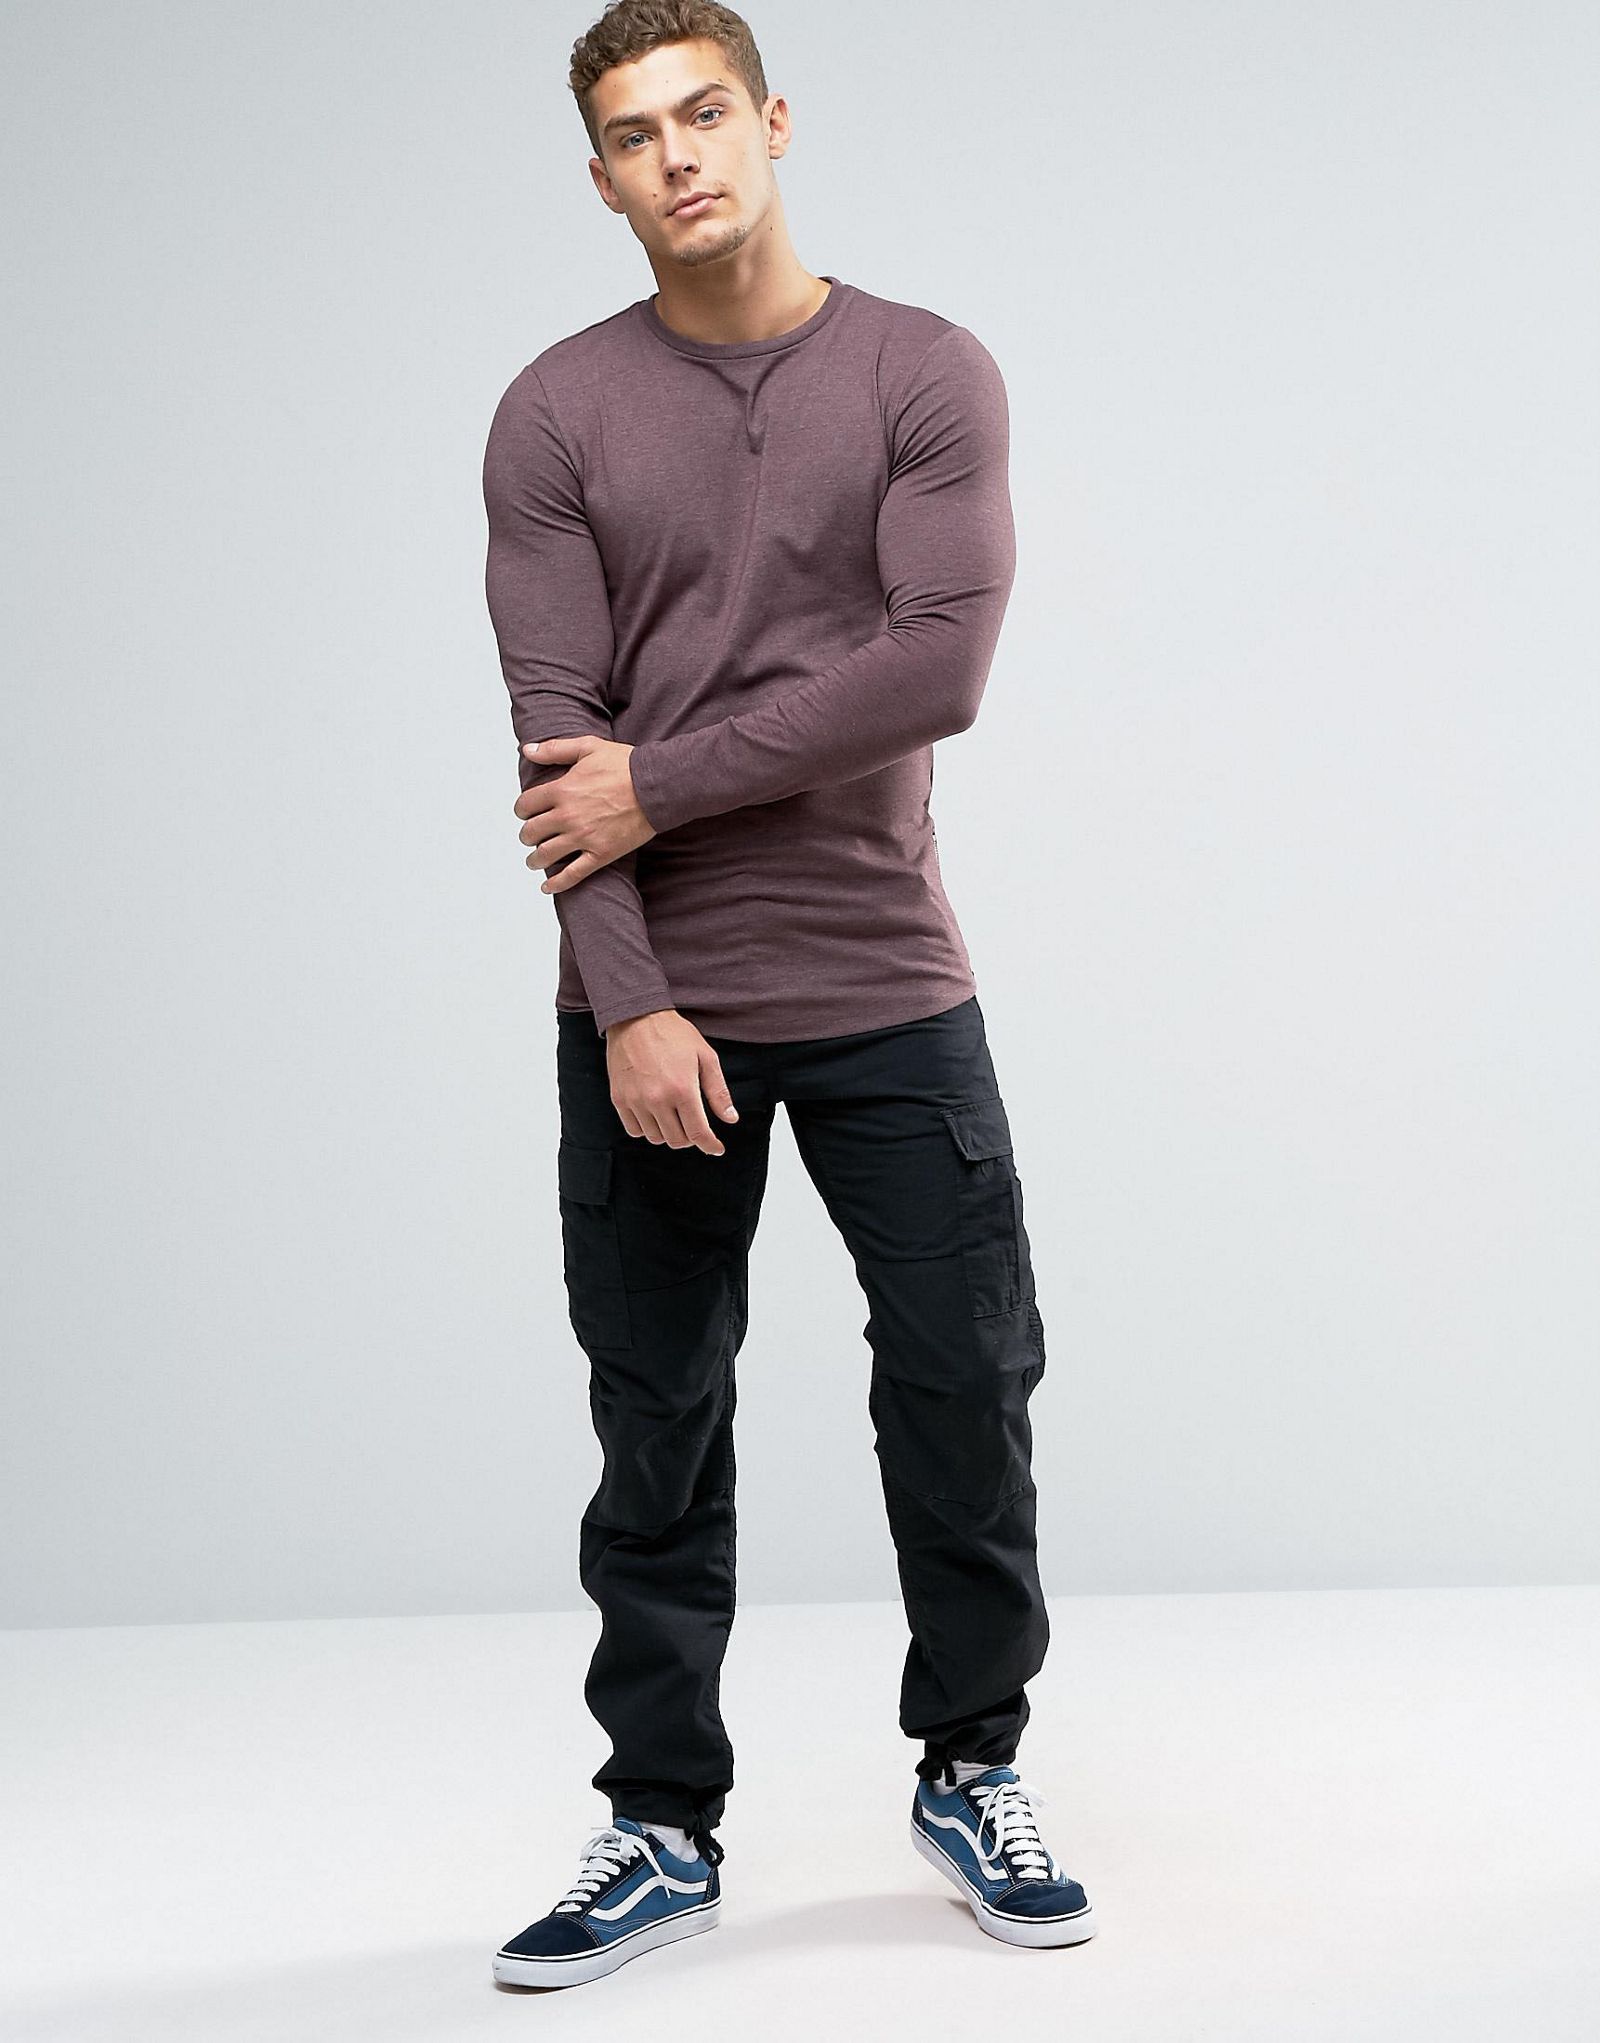 ASOS Longline Muscle Long Sleeve T-Shirt With Zips and Curve Hem